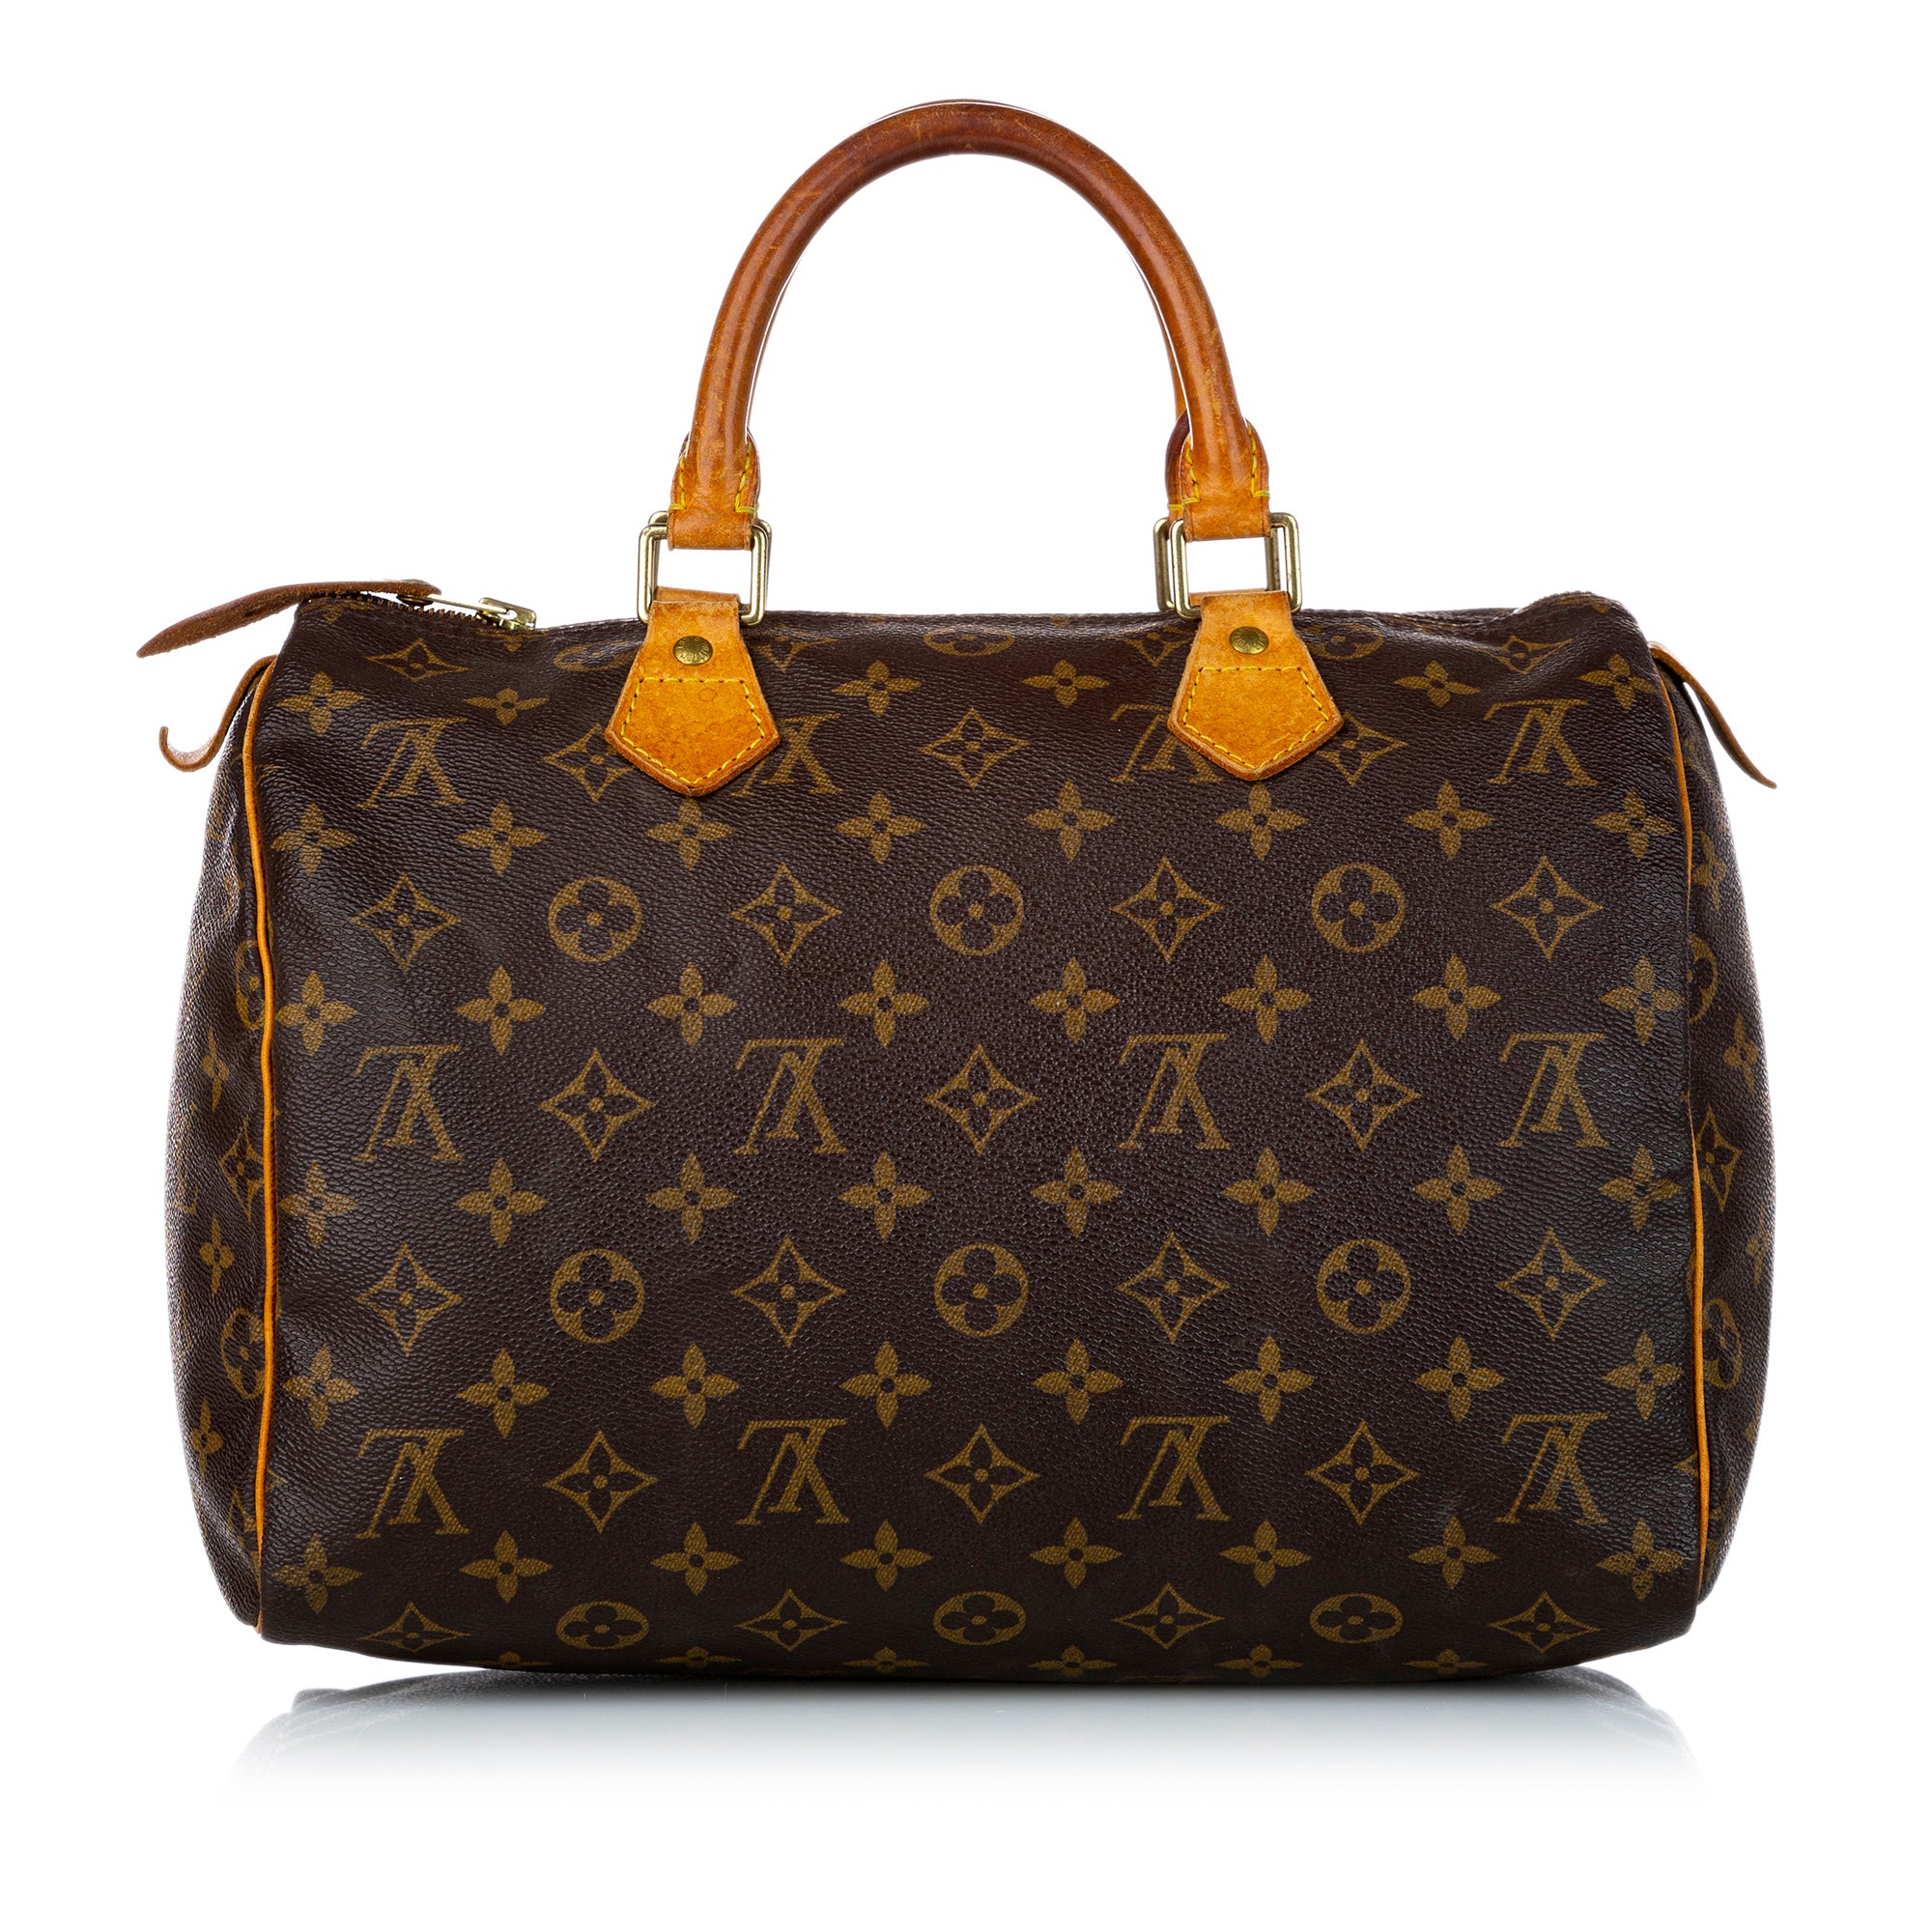 How Do I Clean My Louis Vuitton Speedy Baggage